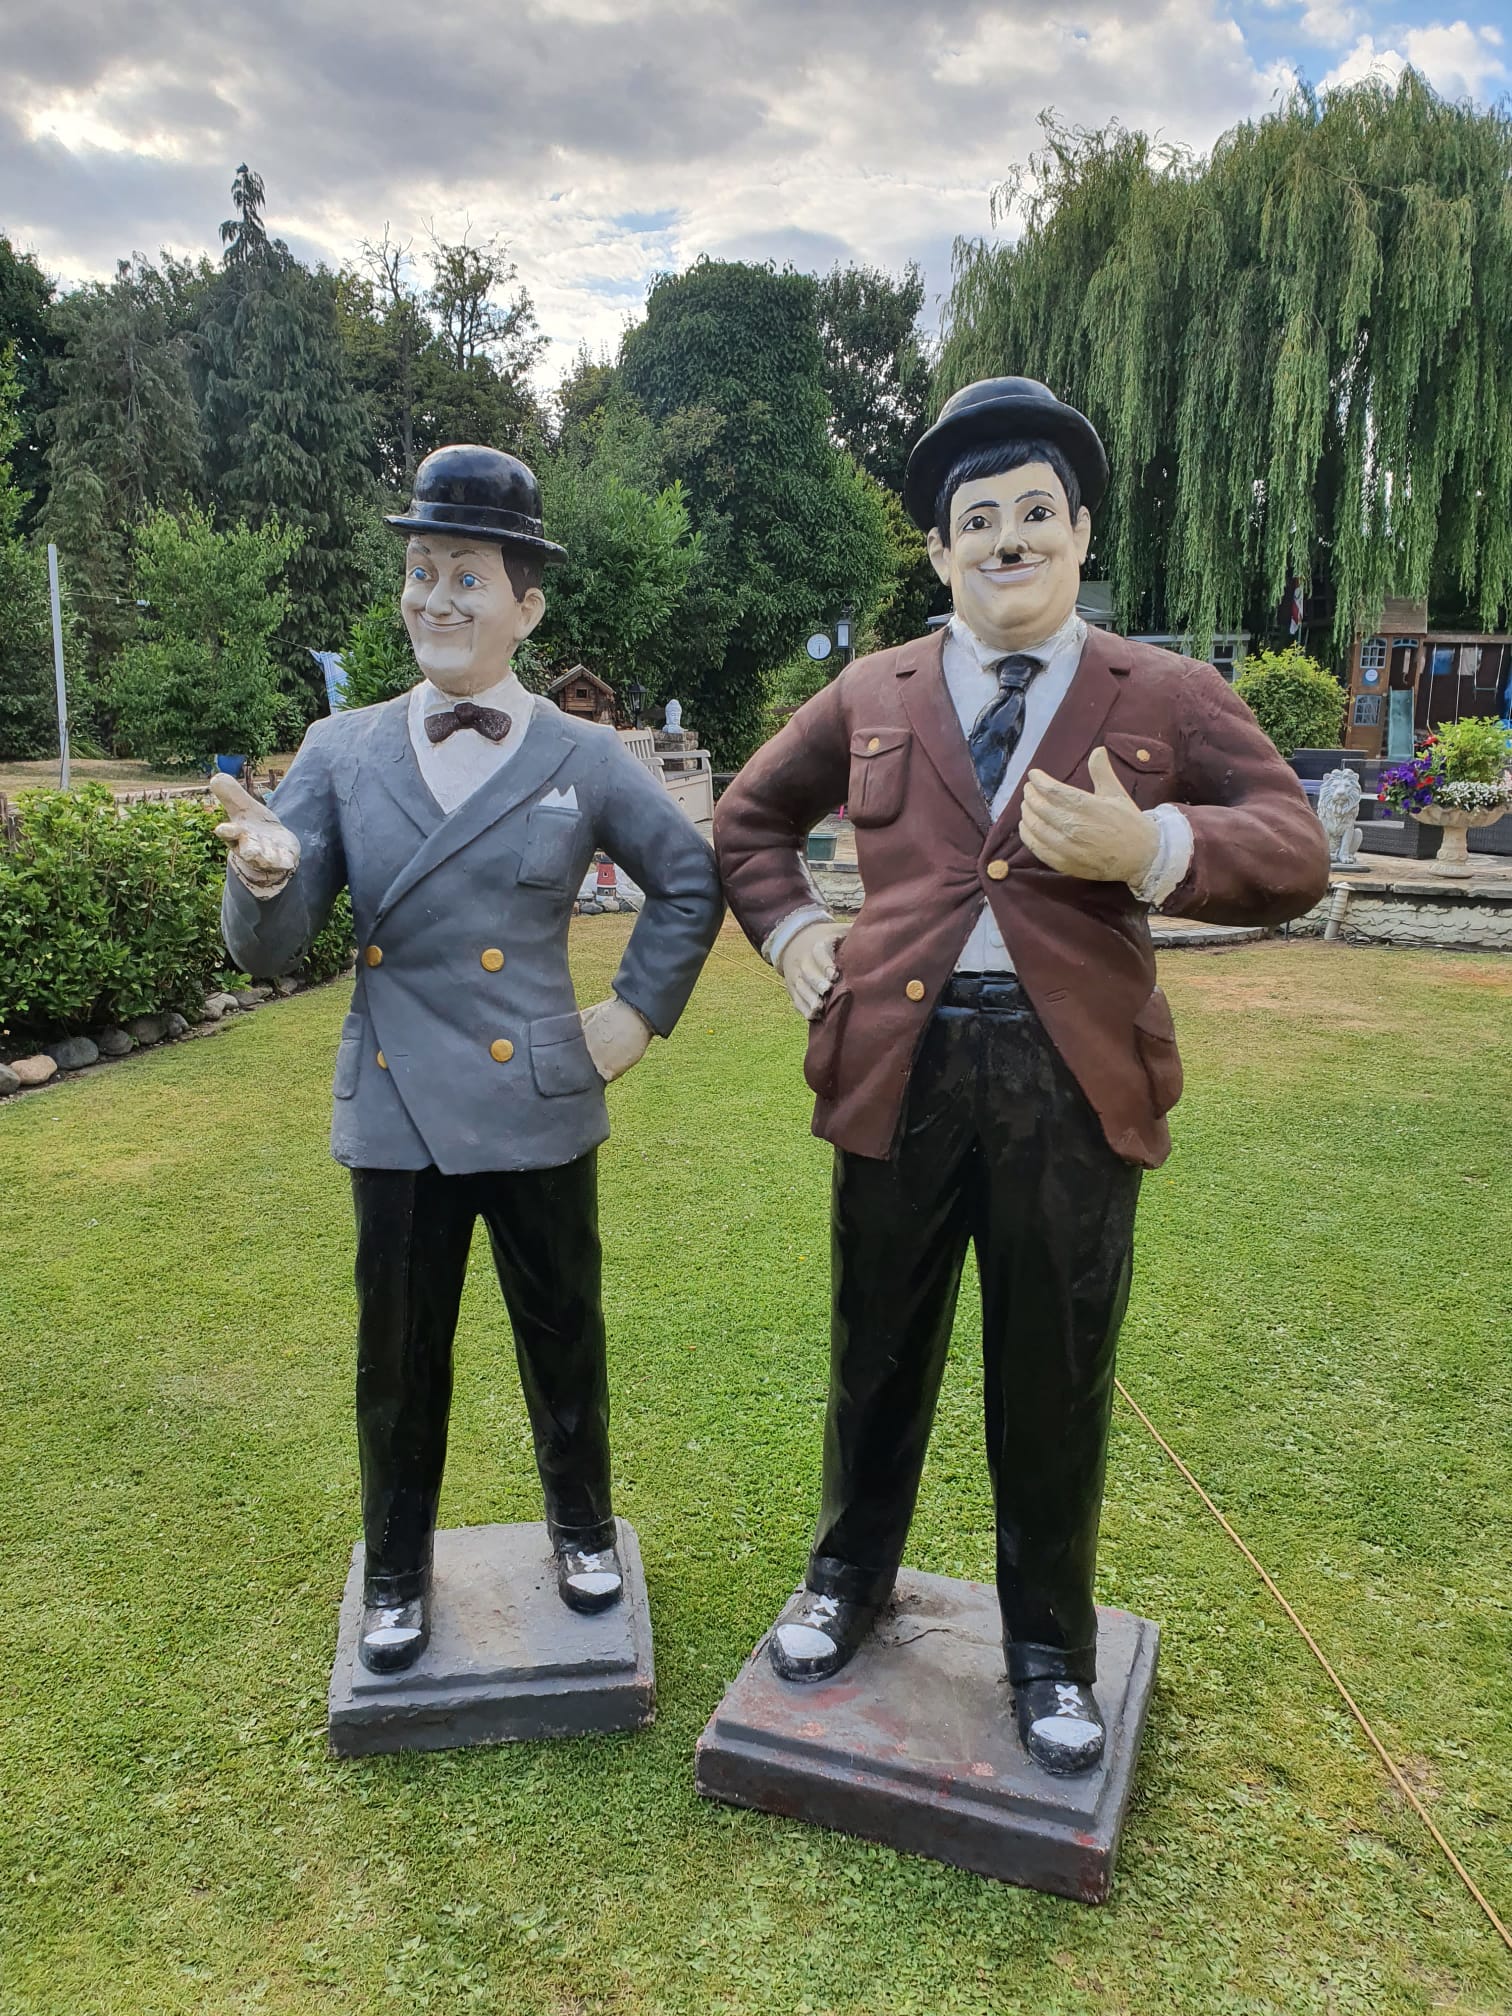 The 6ft fibreglass Laurel and Hardy statues were missing for nearly a year from a home in Romford and were found by police on July 15 (Lesley Haylett/PA)